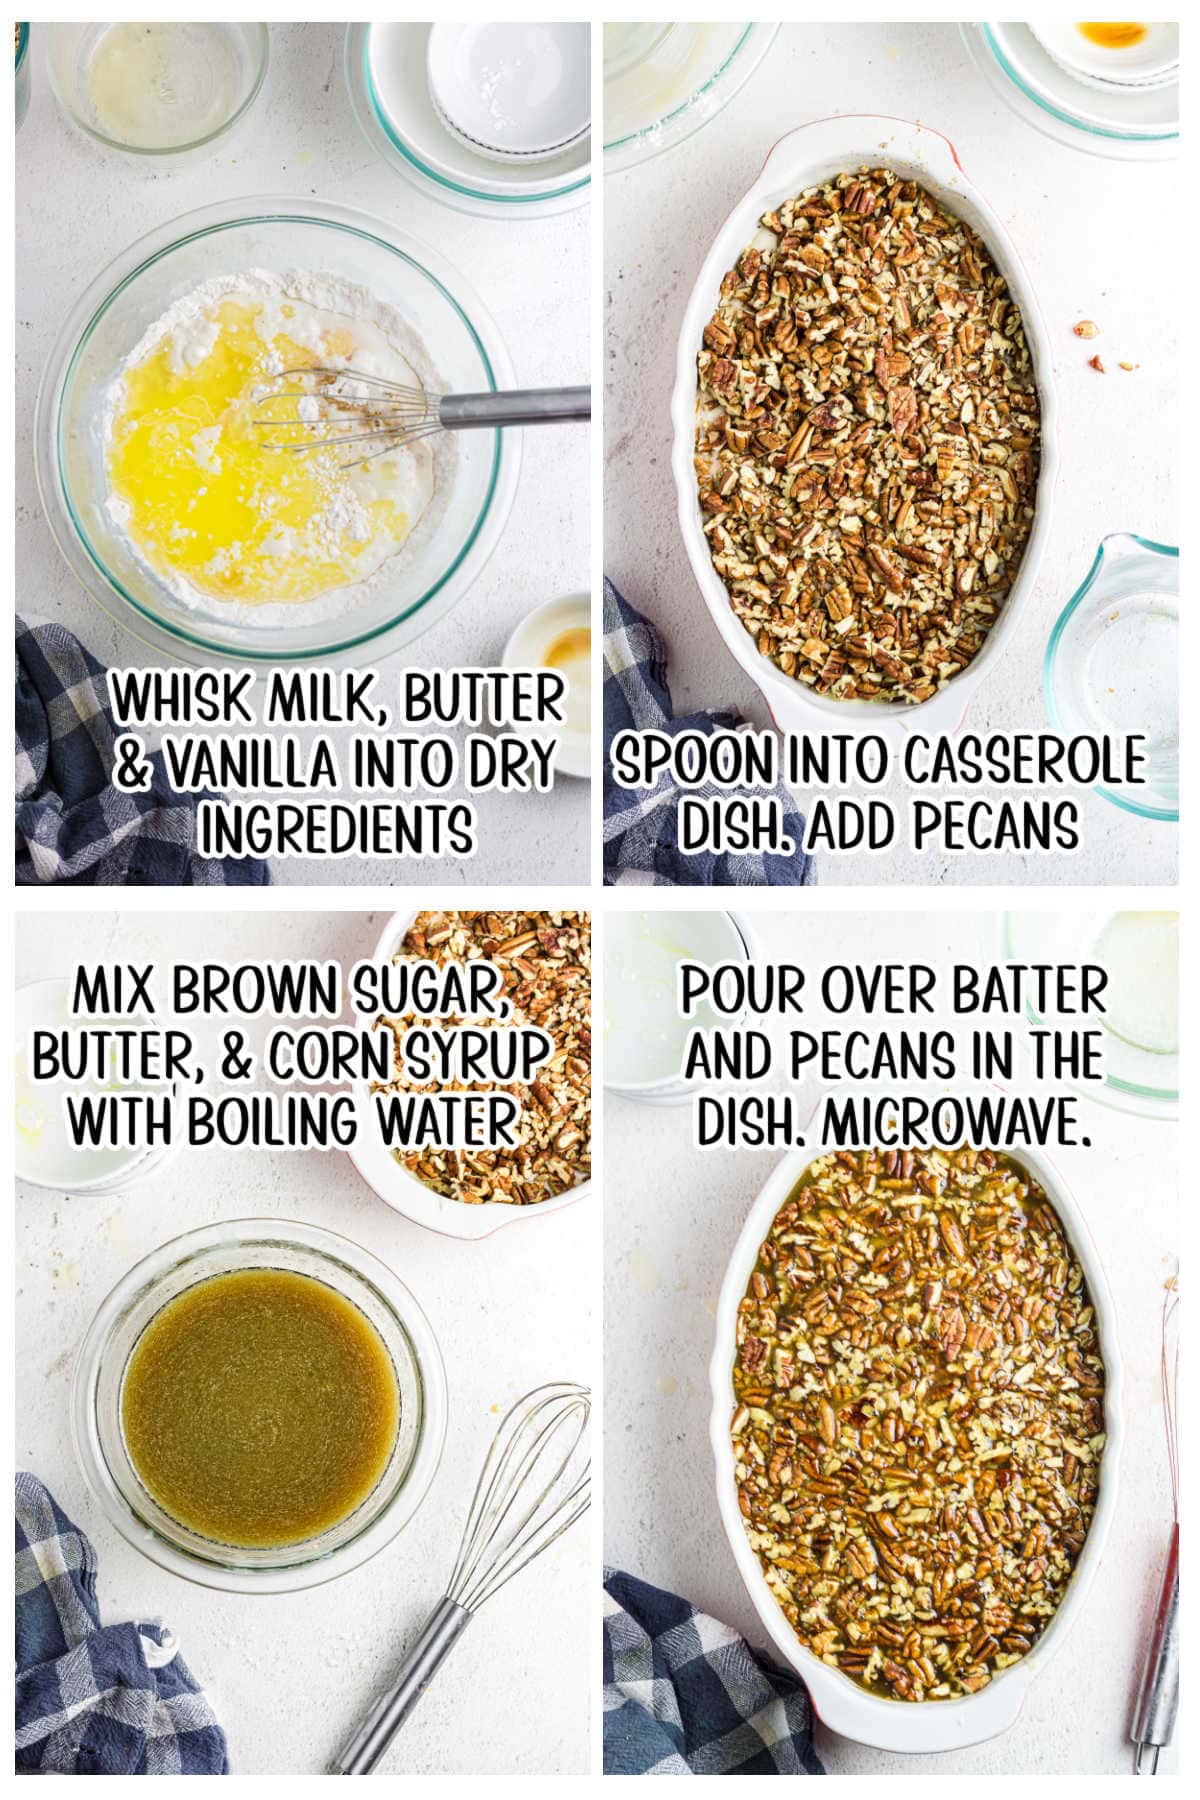 Four overhead images in a grid with text overlay, showing the main recipe steps. 1) Liquid ingredients in a glass bowl with a whisk. 2) Dry ingredients topped with pecans in a baking dish. 3) Sugars mixed with water in a small bowl next to a whisk. 4) The same pecan-topped baking dish with a glossy sugar-sauce overtop.